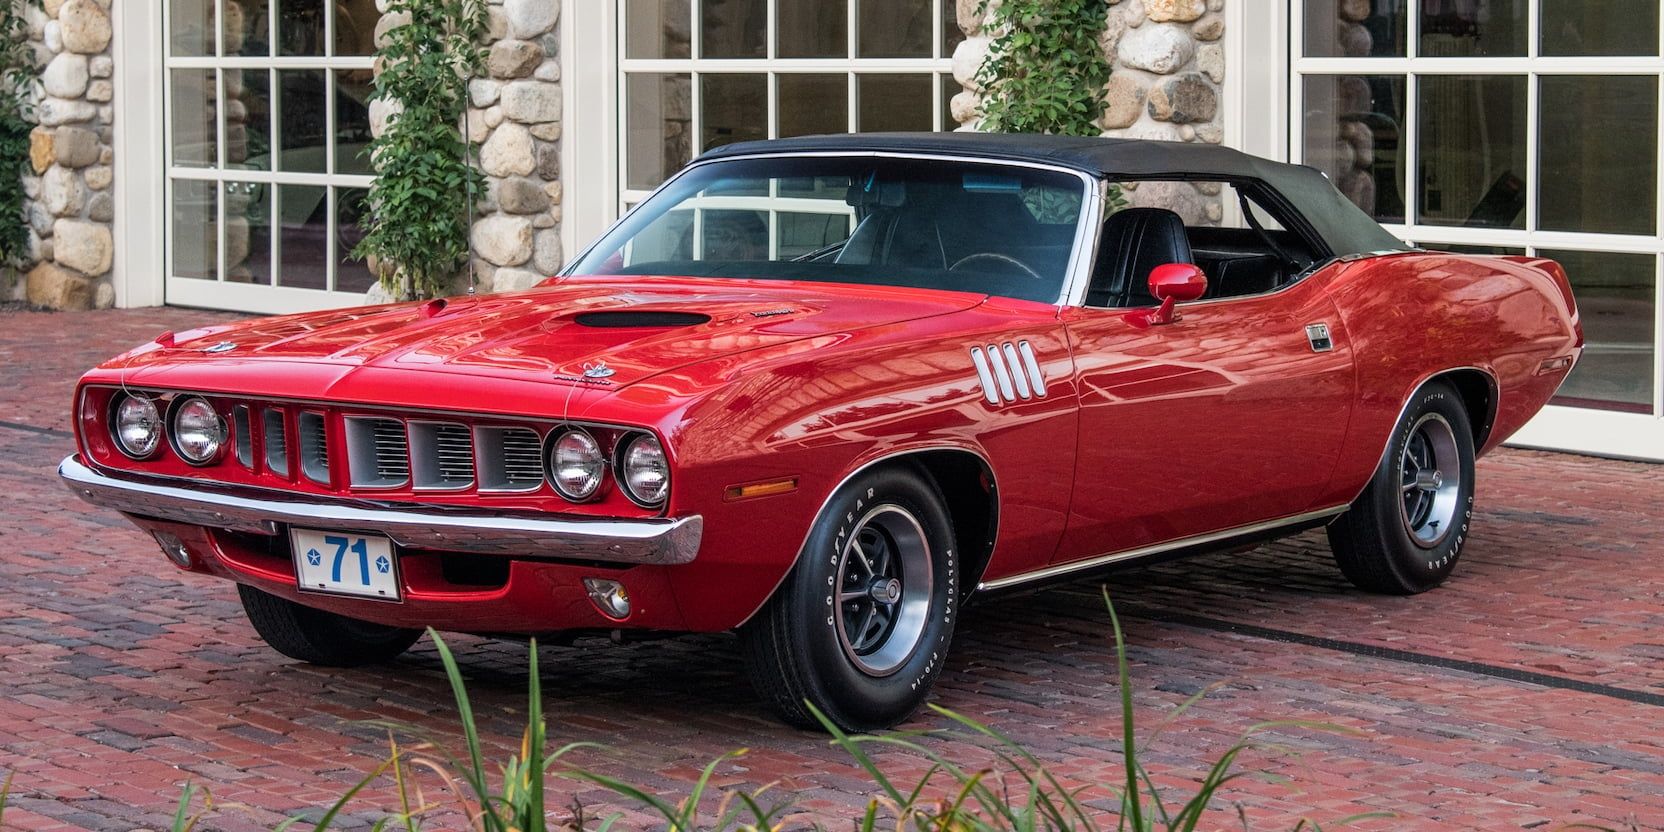 All The Muscle Cars Of The 70s Ranked From Least To Most Powerful